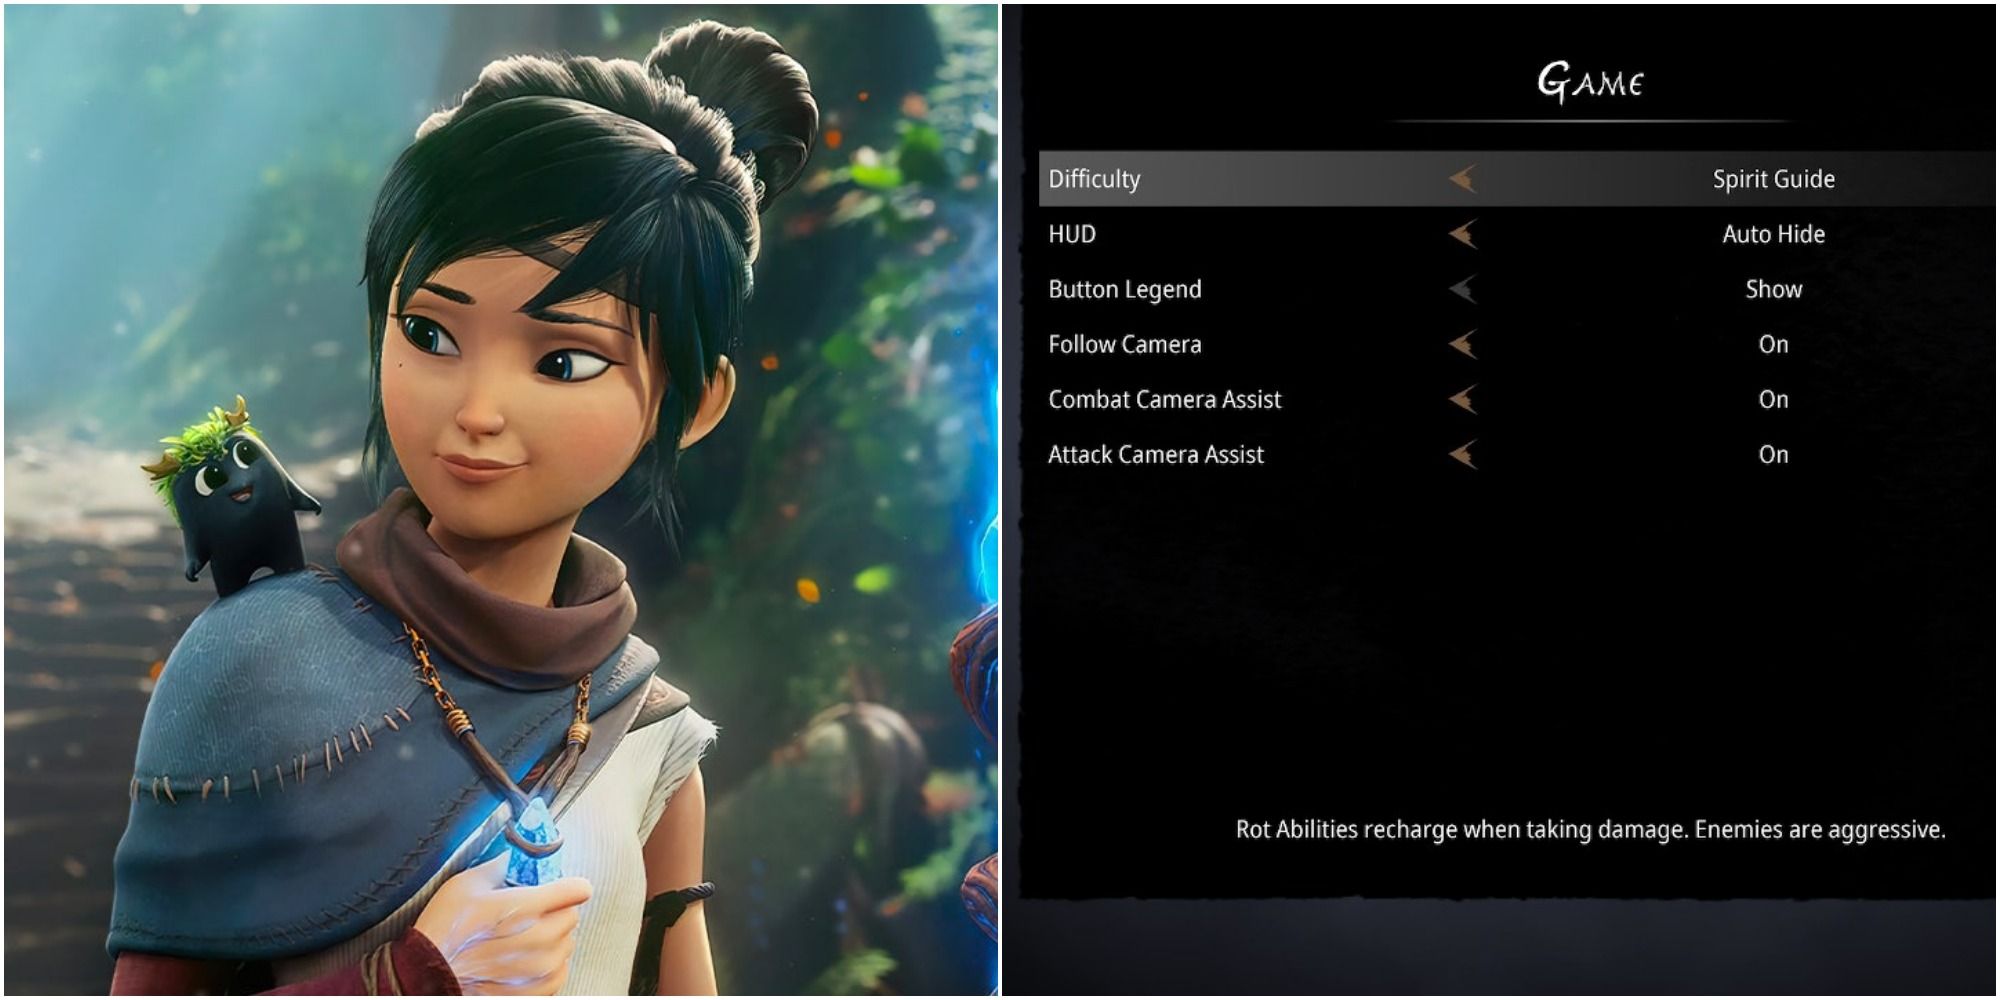 Split image of Kena smiling down at small Soot spirit standing on her shoulder and to the right a still of game settings